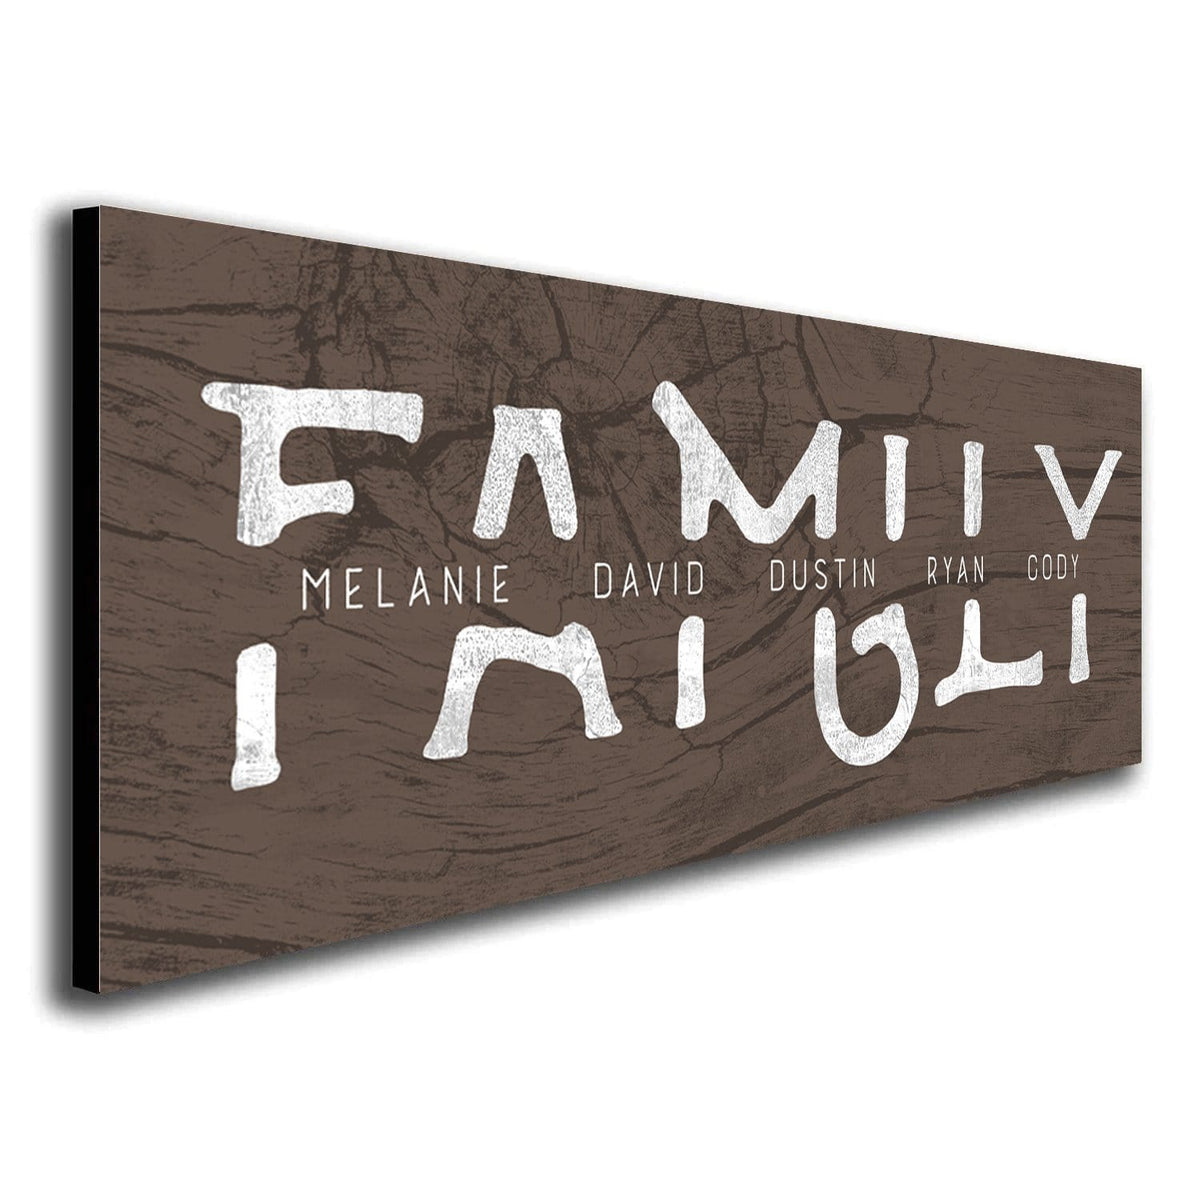 Personalized Family Name Print from Personal Prints